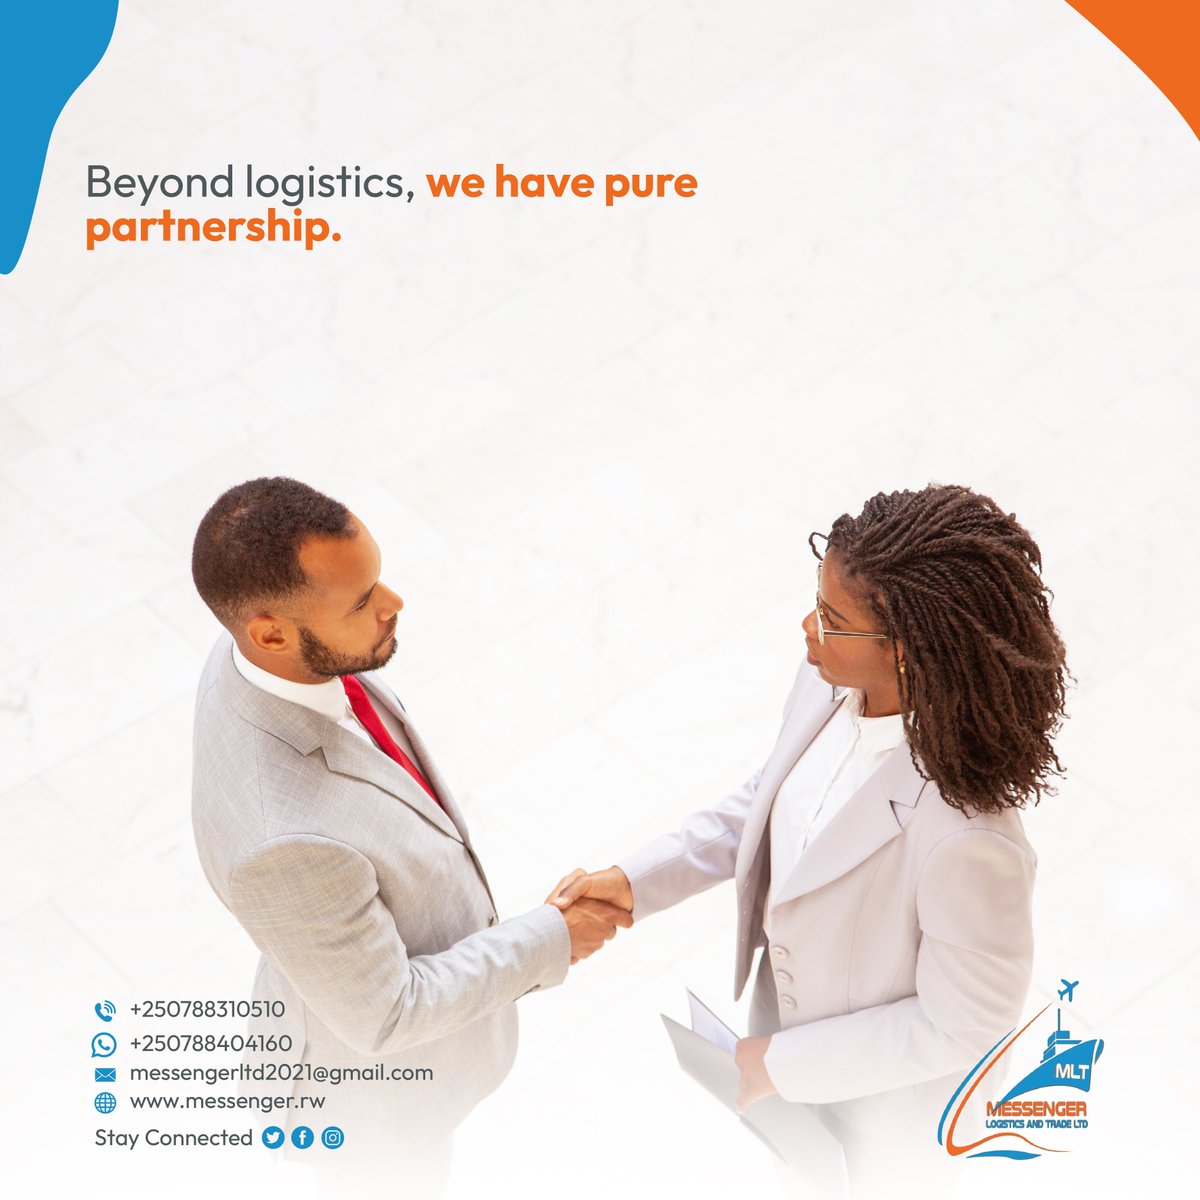 It is our mission to create a long lasting functional partnership with our clientele. Much appreciation to those who have trusted us so far. 

Visit our website to learn more.

#MessengerLogisticsAndTrade
#customerappriciation